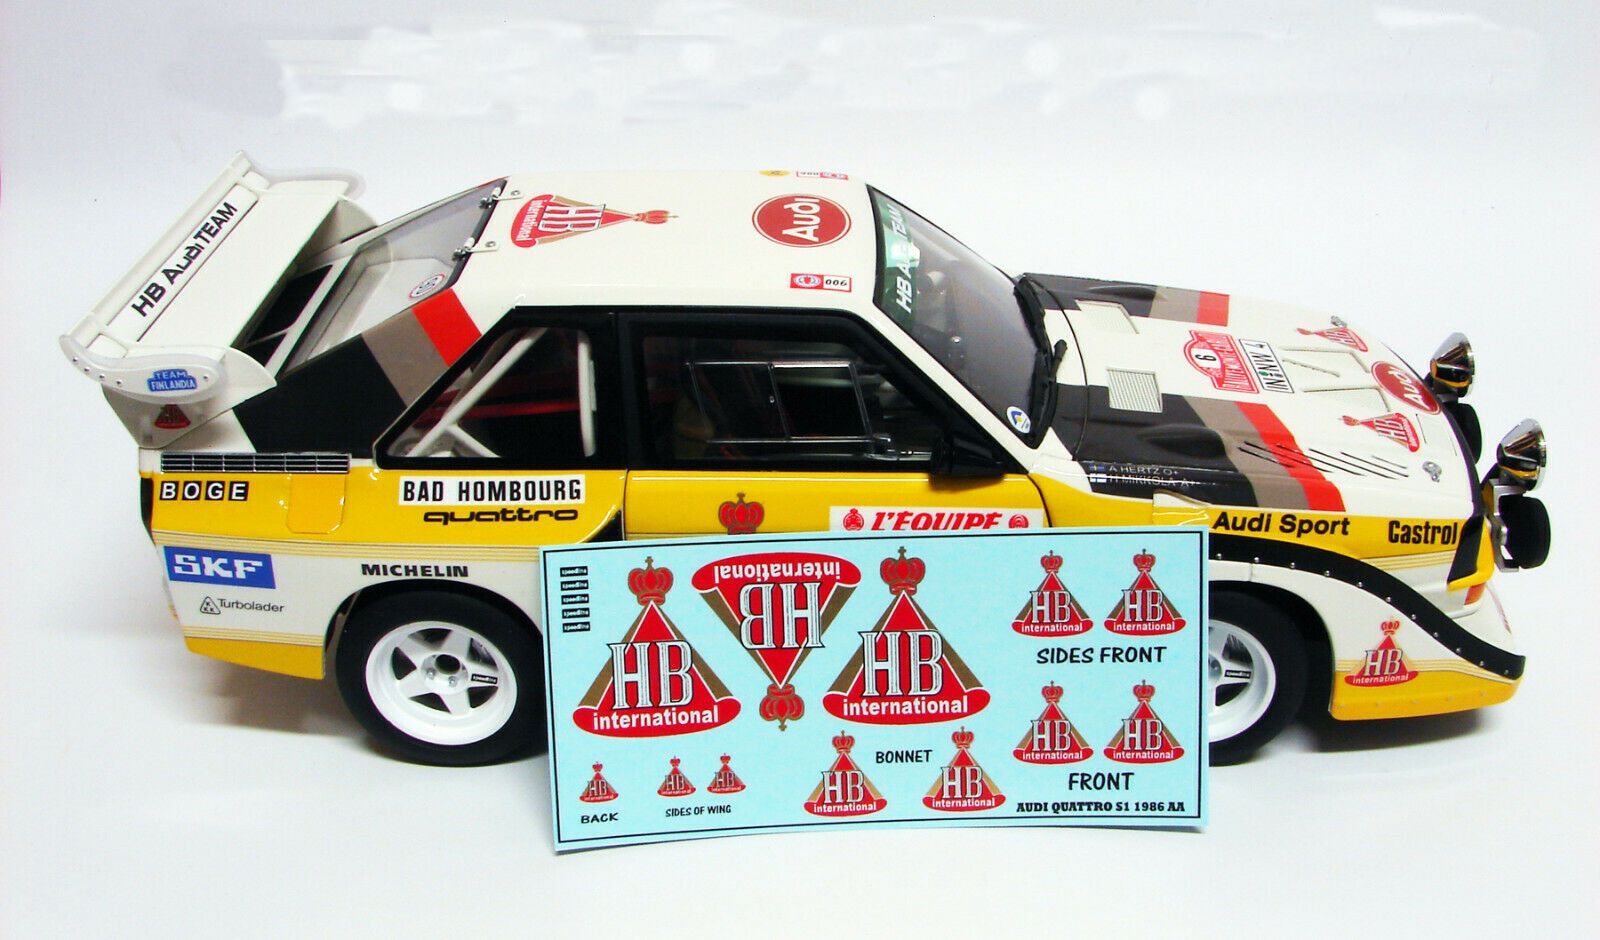 Decals 1/18 "HB" - AUDI SPORT S1 QUATTRO RALLY 1986 - decals for Auto Art model 